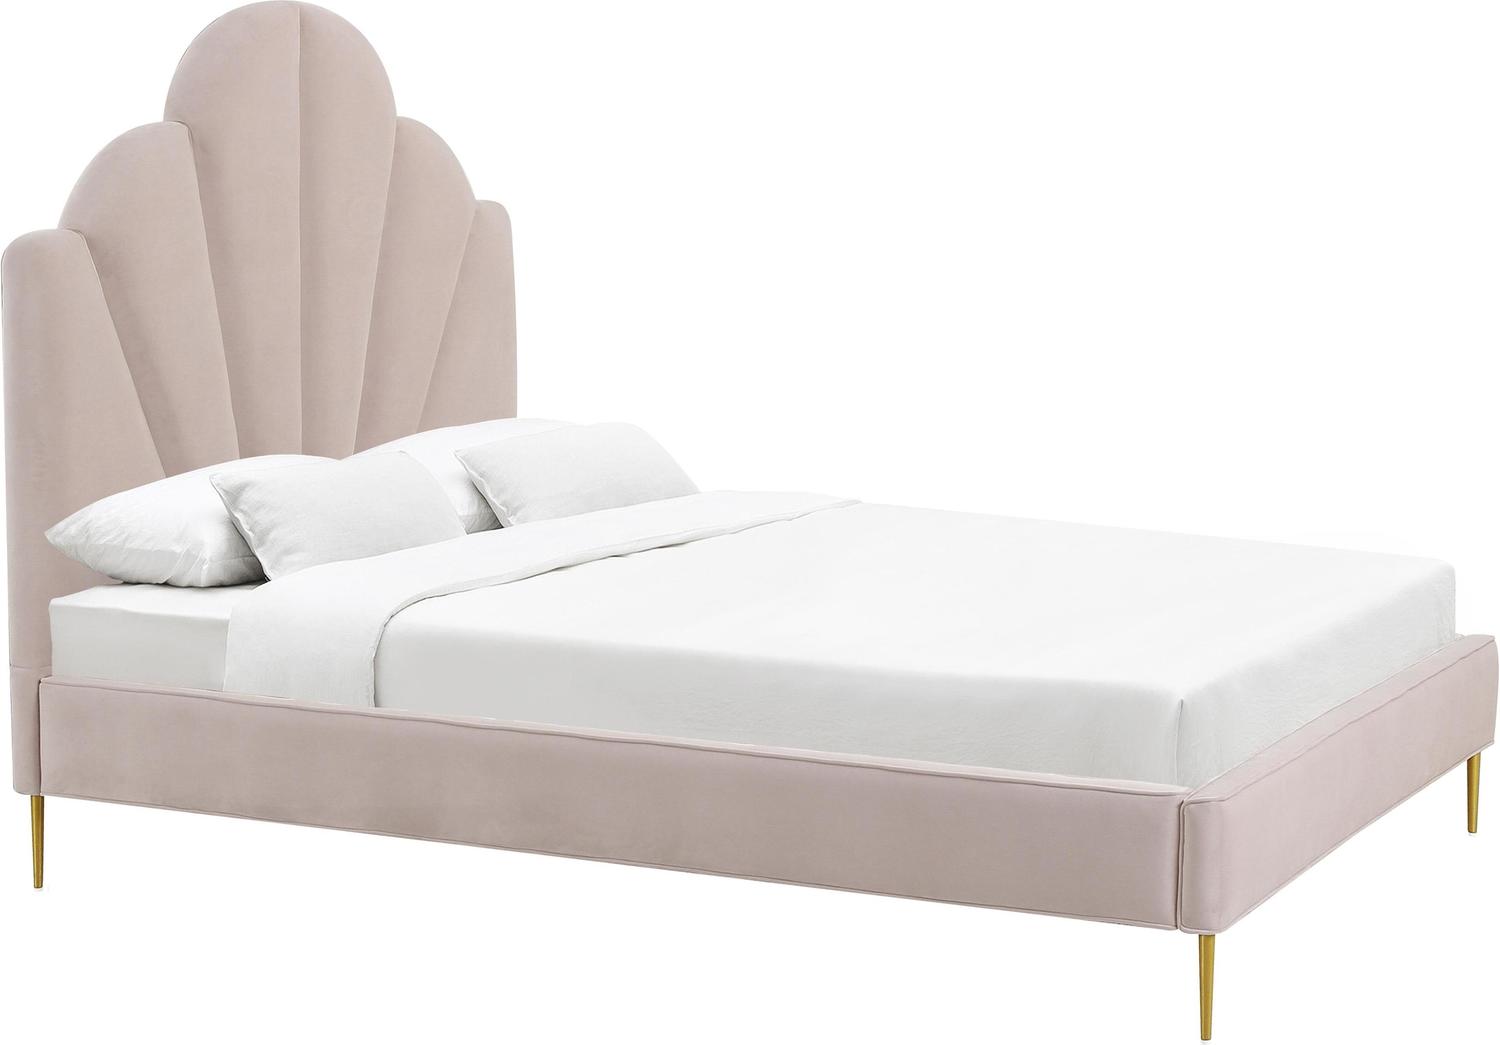 twin bed frame without headboard Contemporary Design Furniture Beds Blush